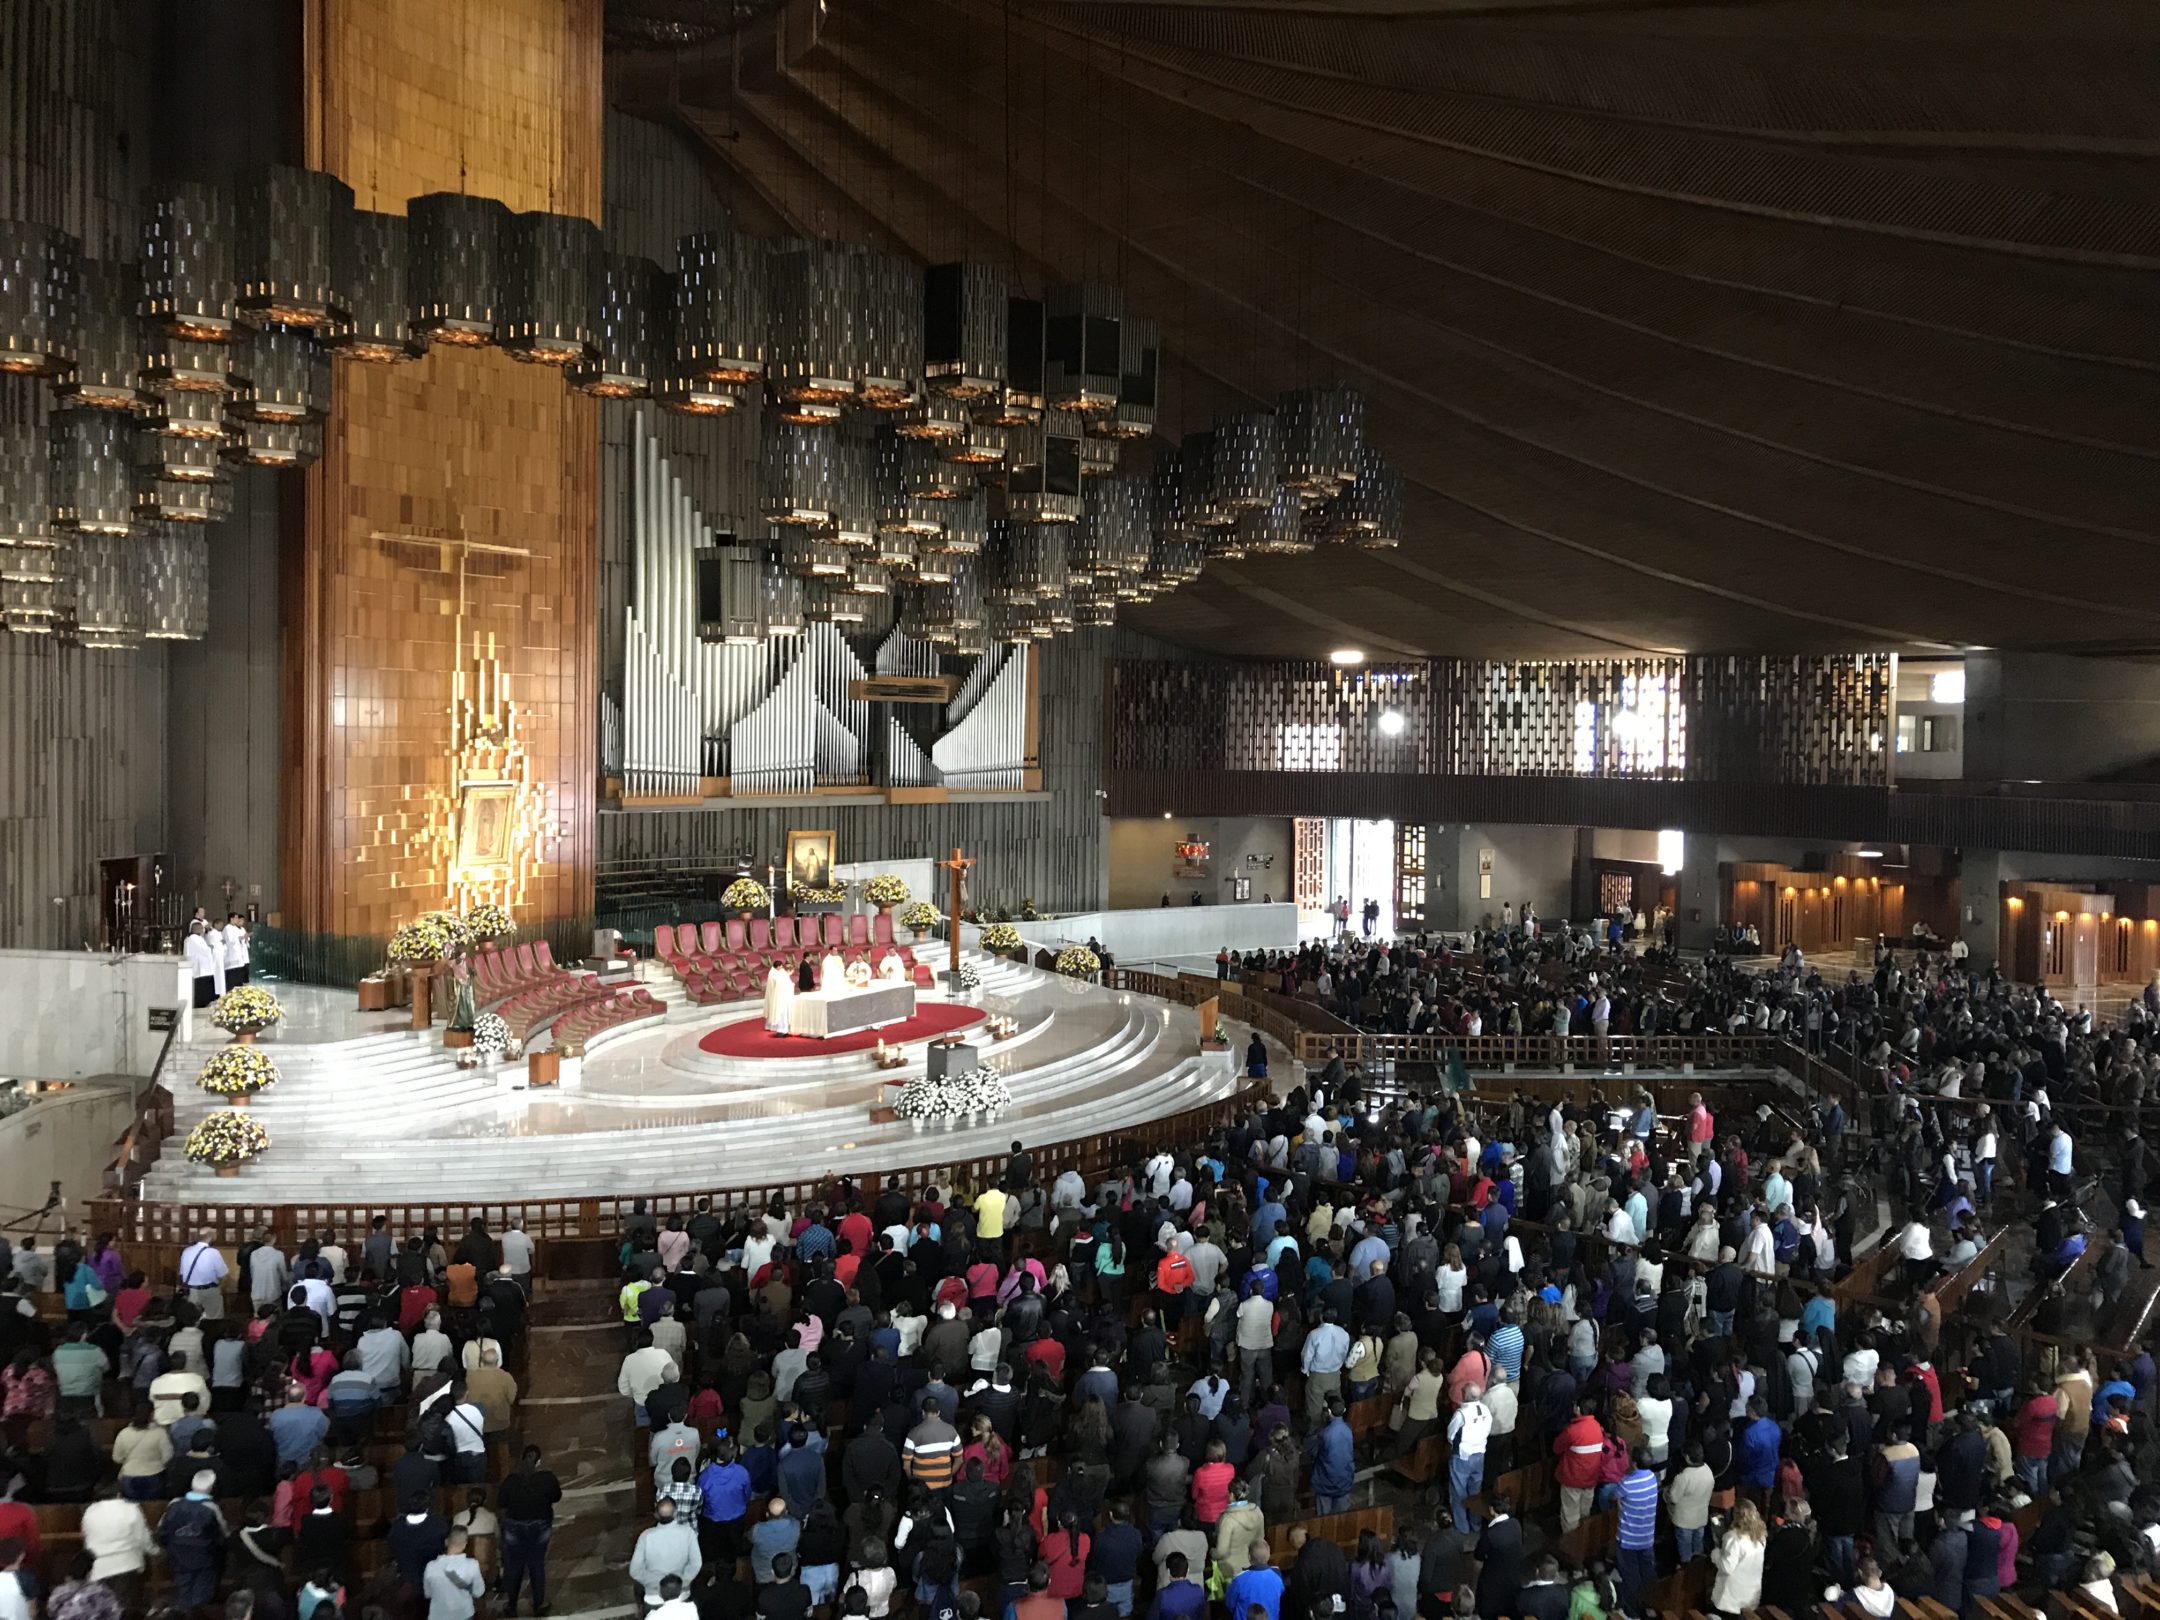 Image of Pilgrimage in Basilica of Our Lady of Guadalupe